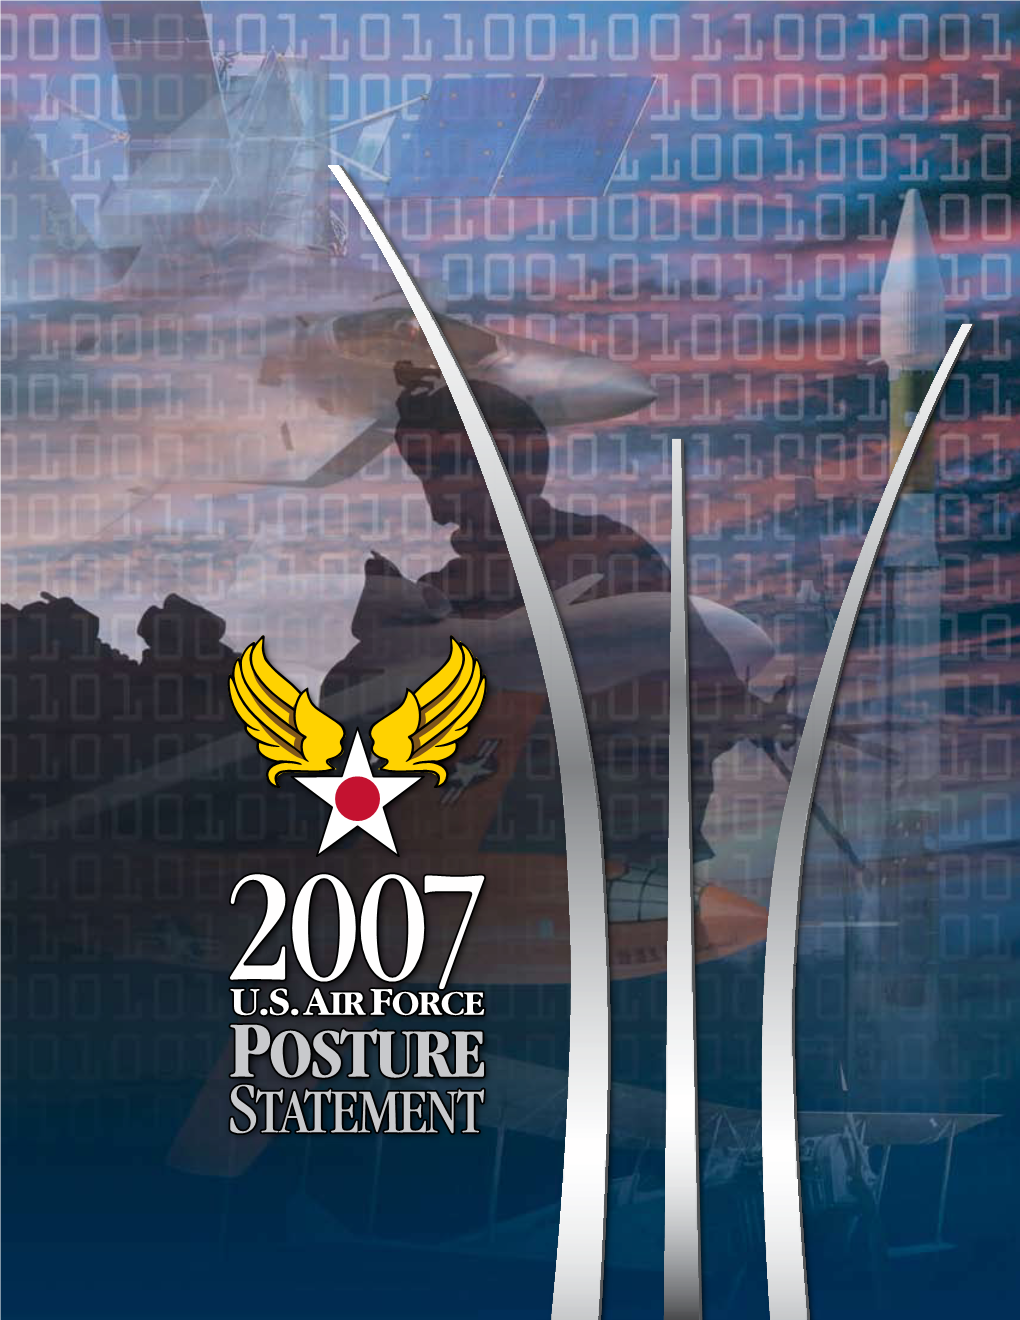 United States Air Force Posture Statement 2007